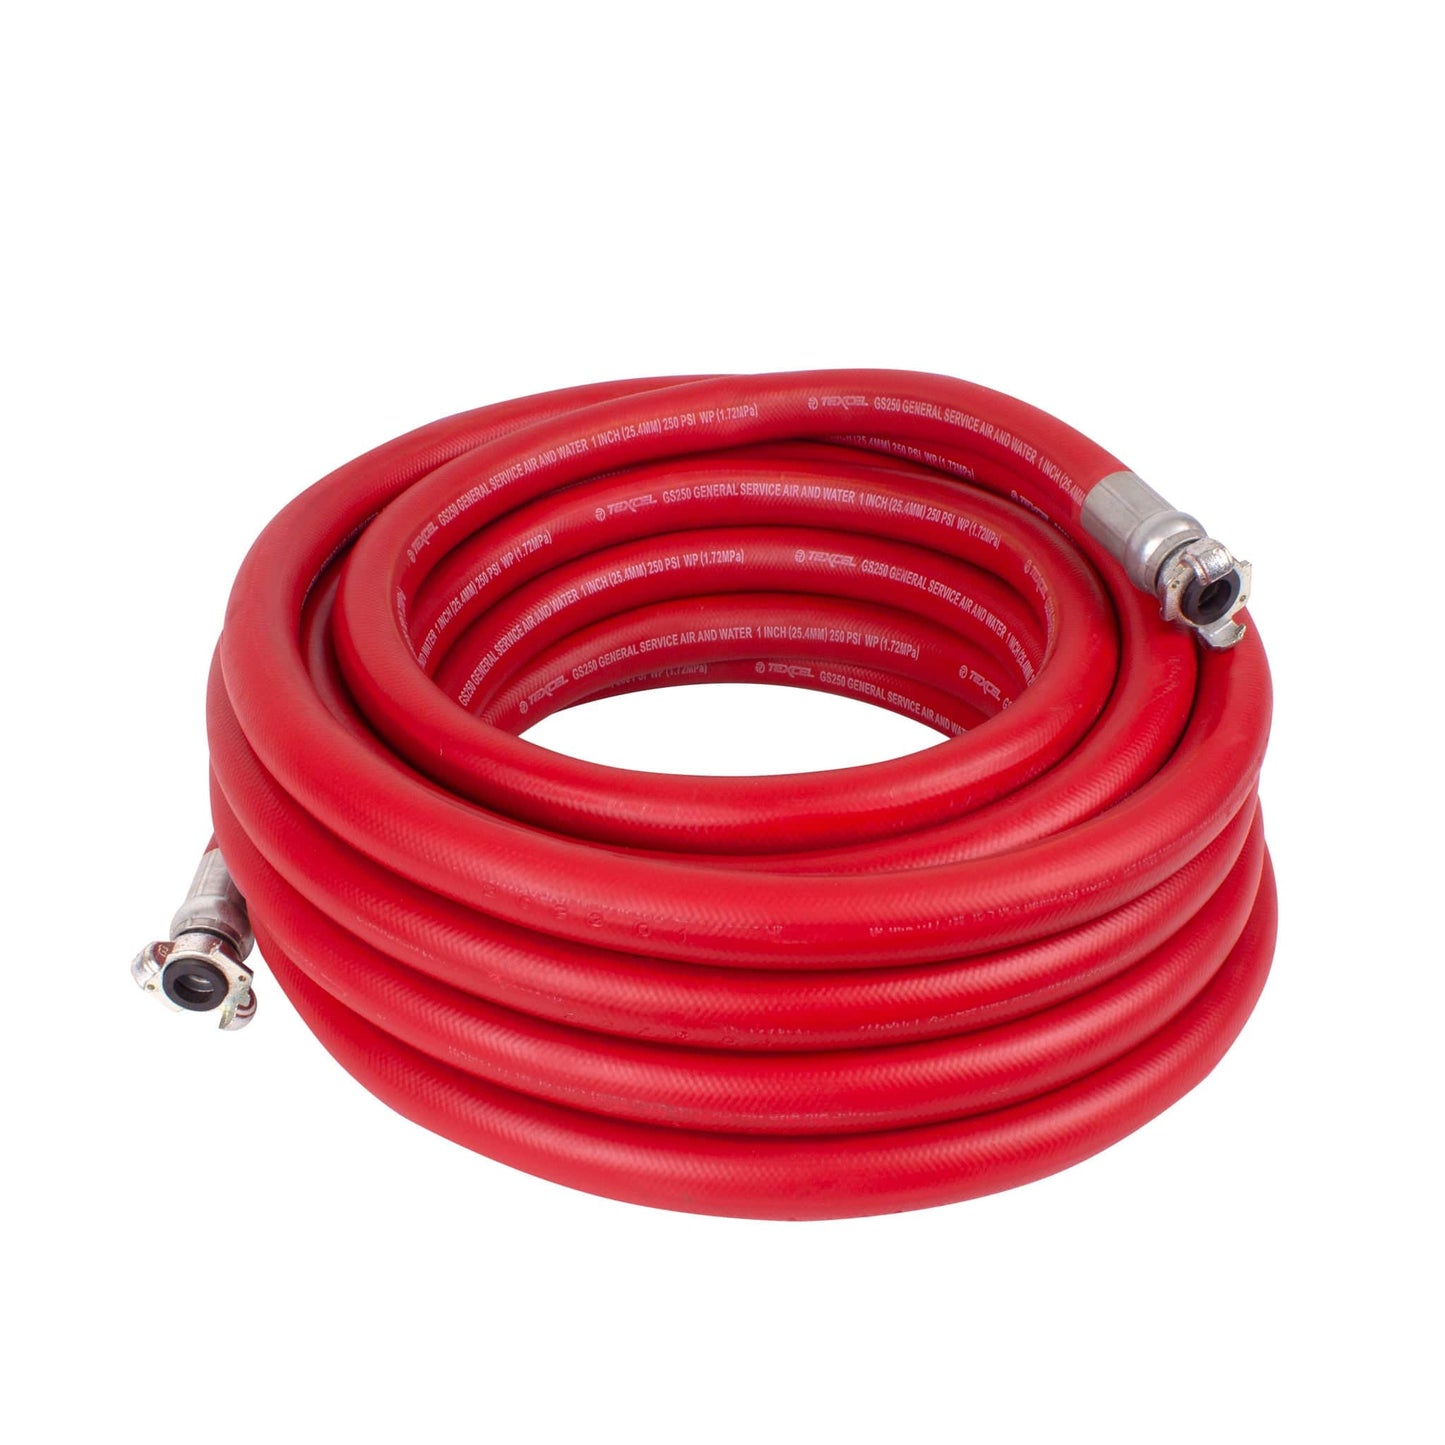 Standard Air Hose Assembly with Couplings - 1" ID x 50' (HT113)